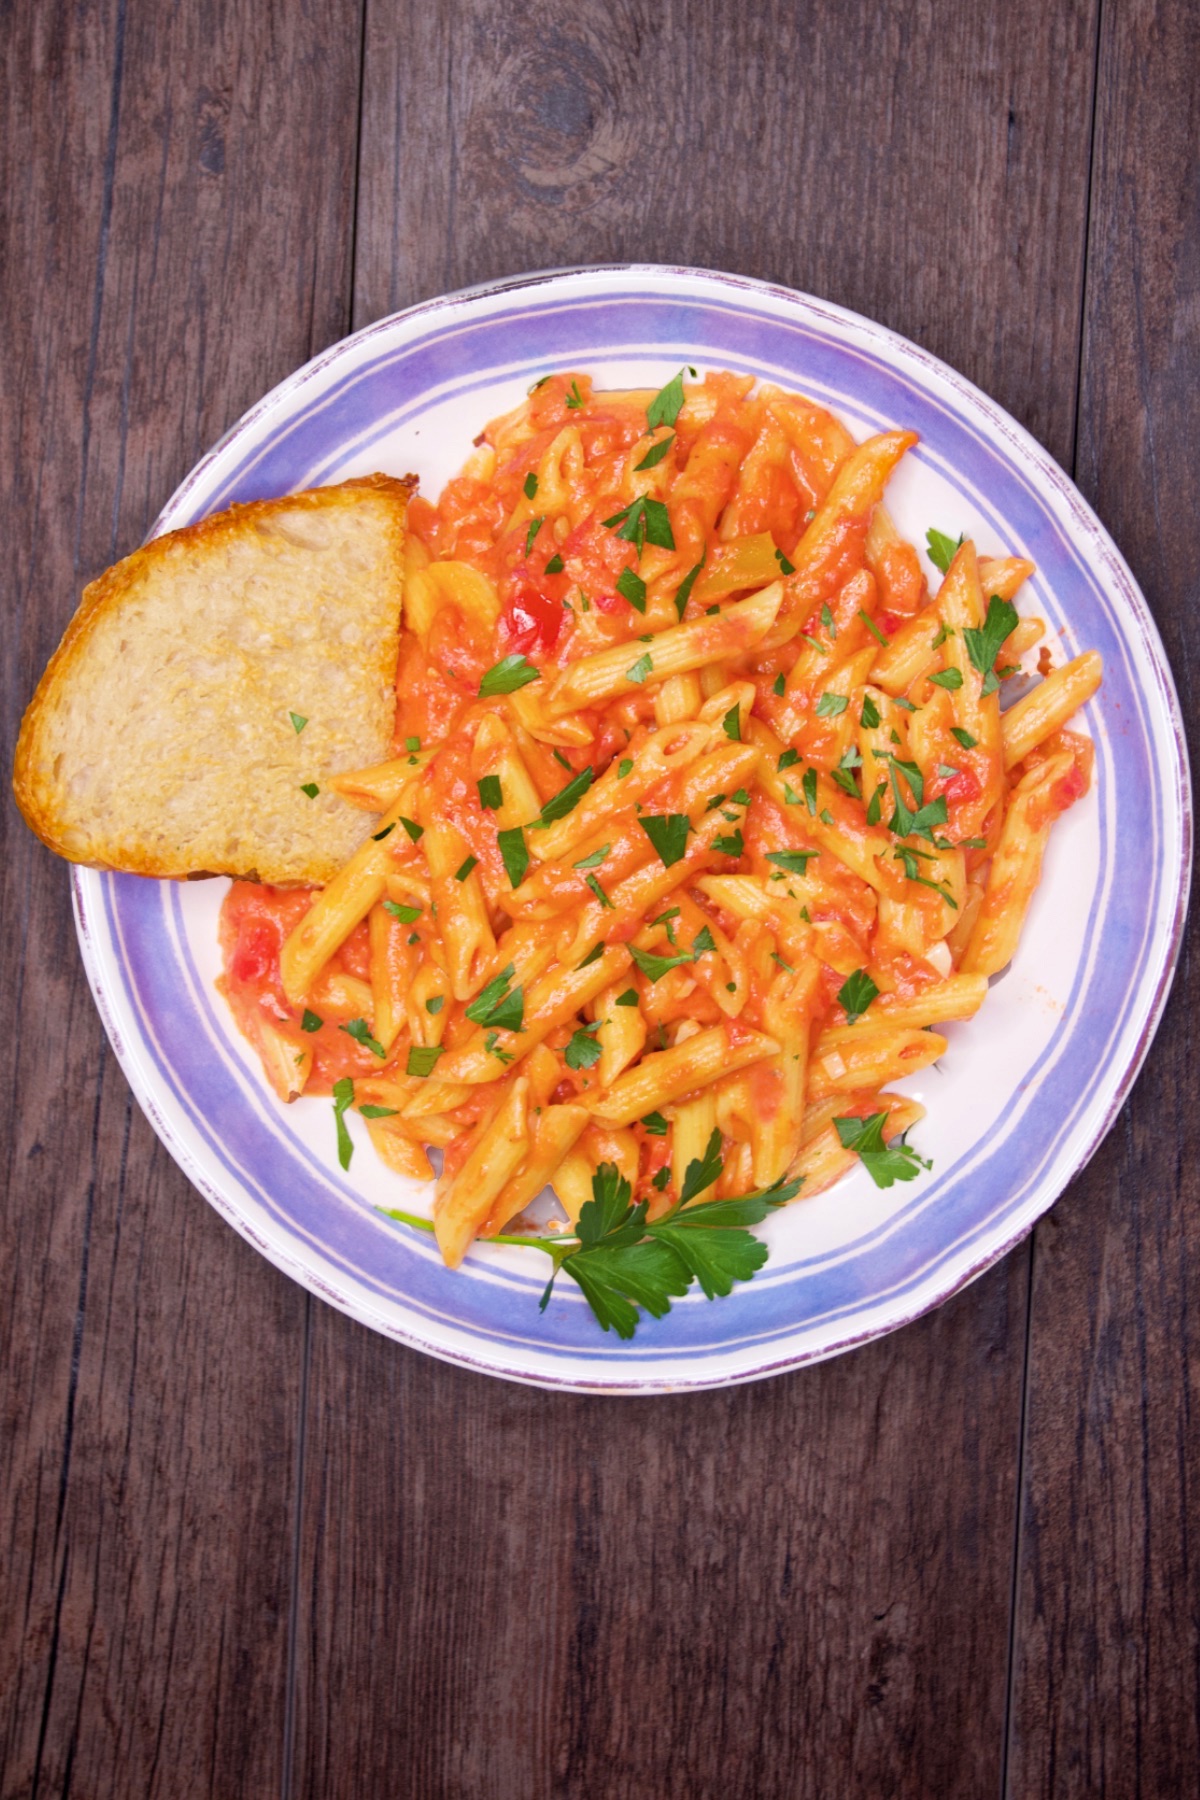 A serving of pasta alla vodka with a sprinkling of chopped parsley and a slice of rustic bread.